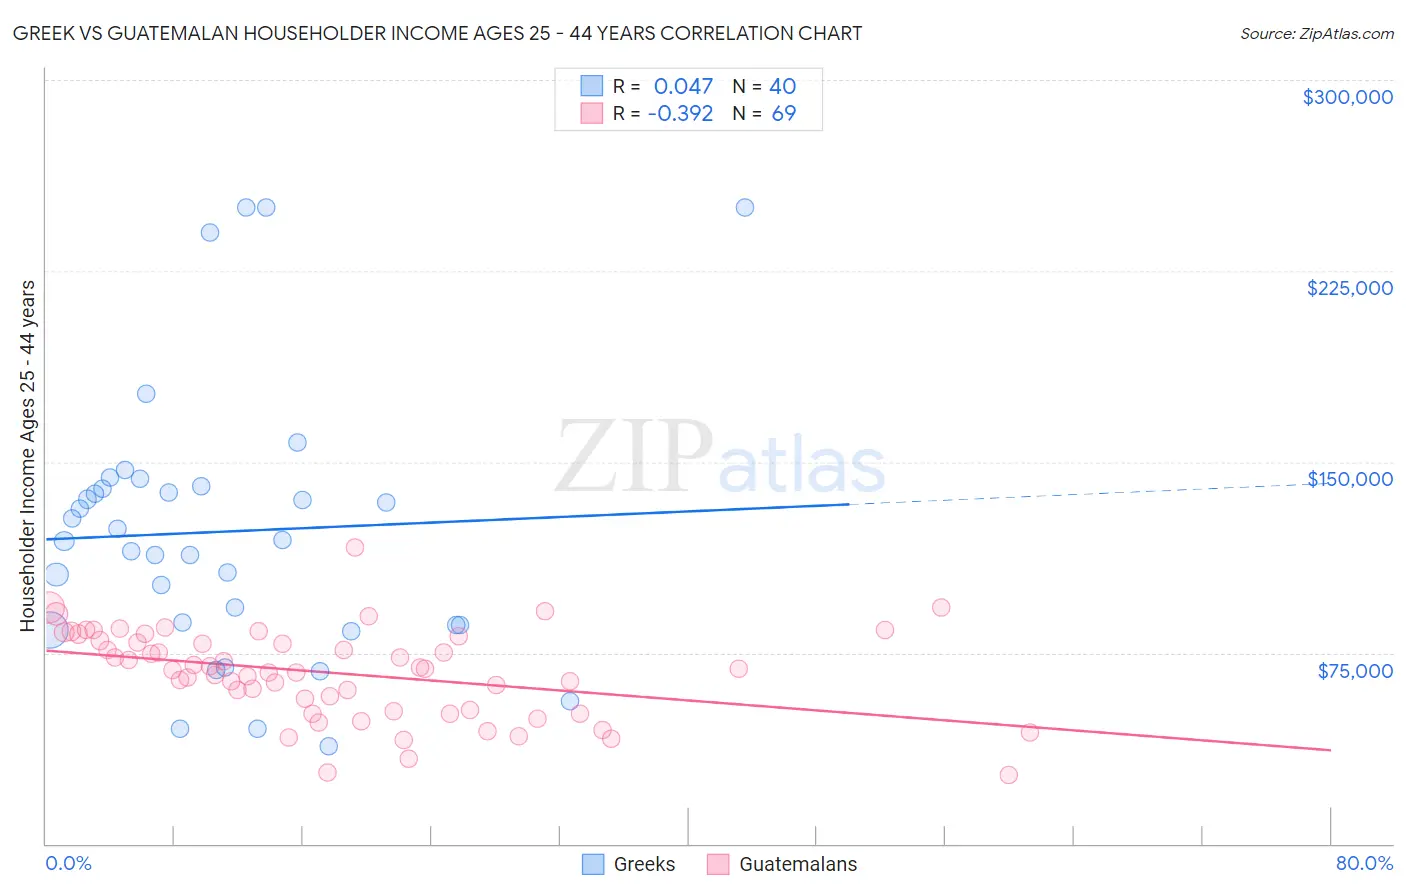 Greek vs Guatemalan Householder Income Ages 25 - 44 years